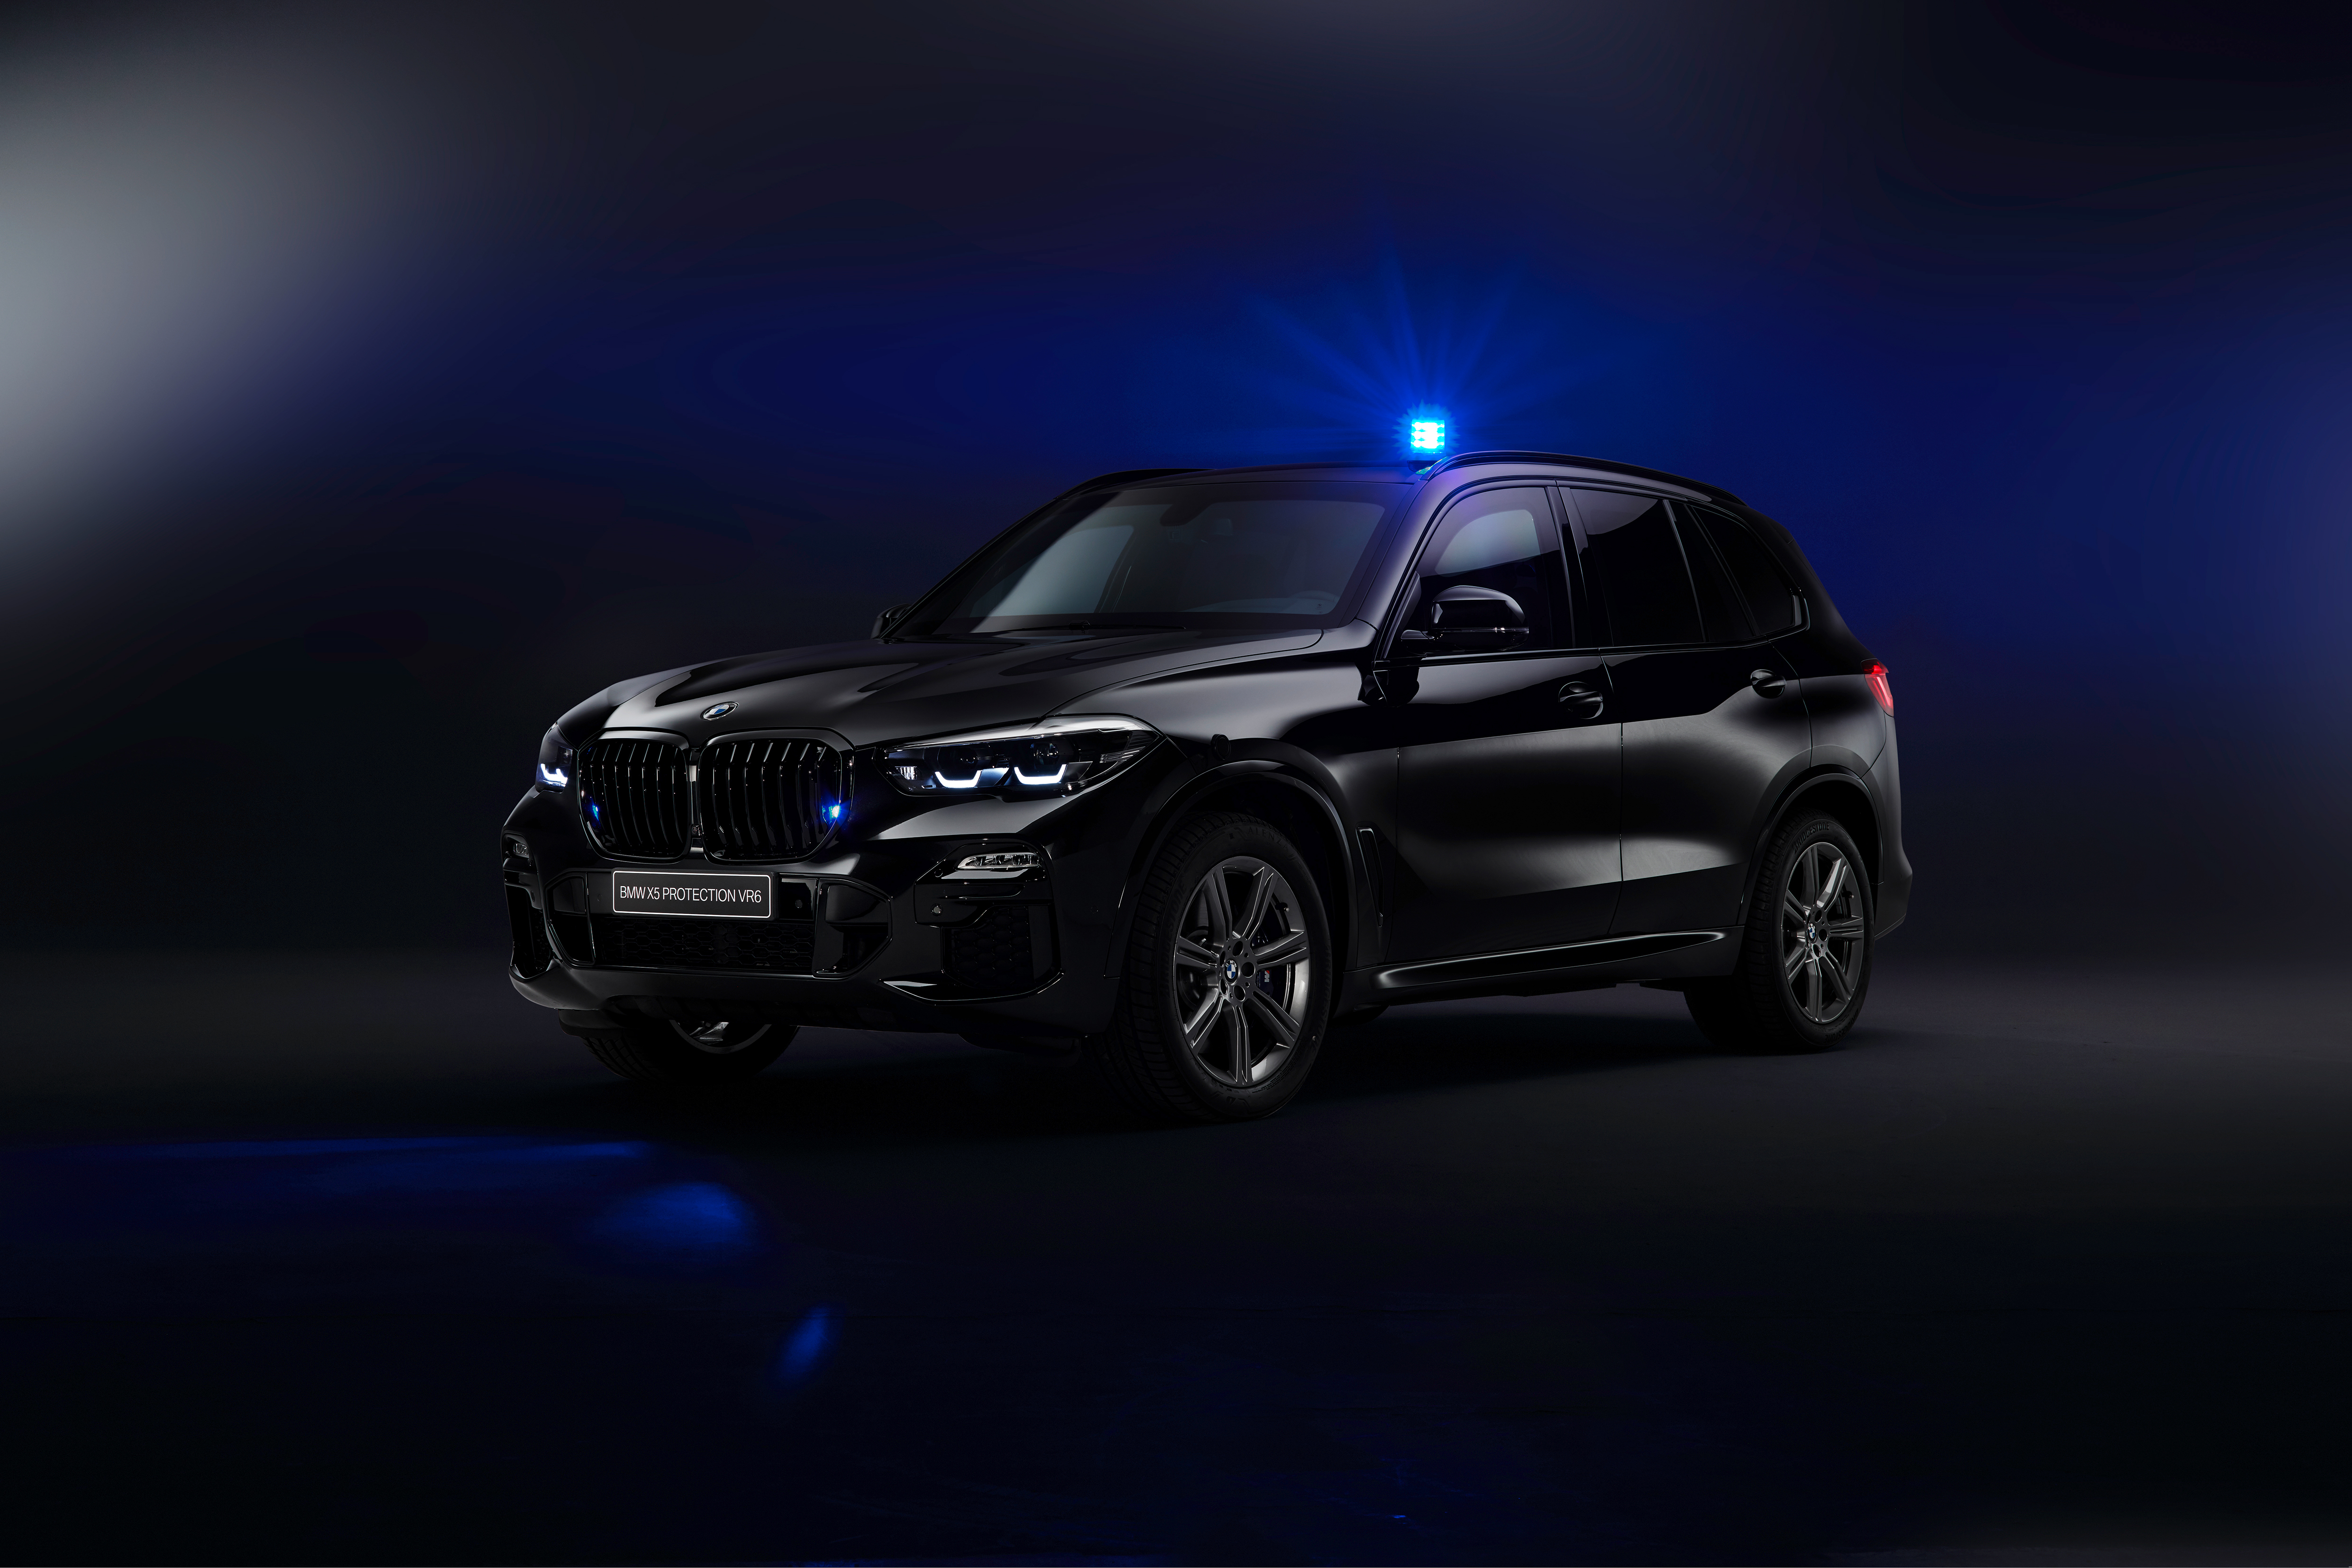 The X5 VR6 Protection Is A Tactical SAV With A Vigilant Mission